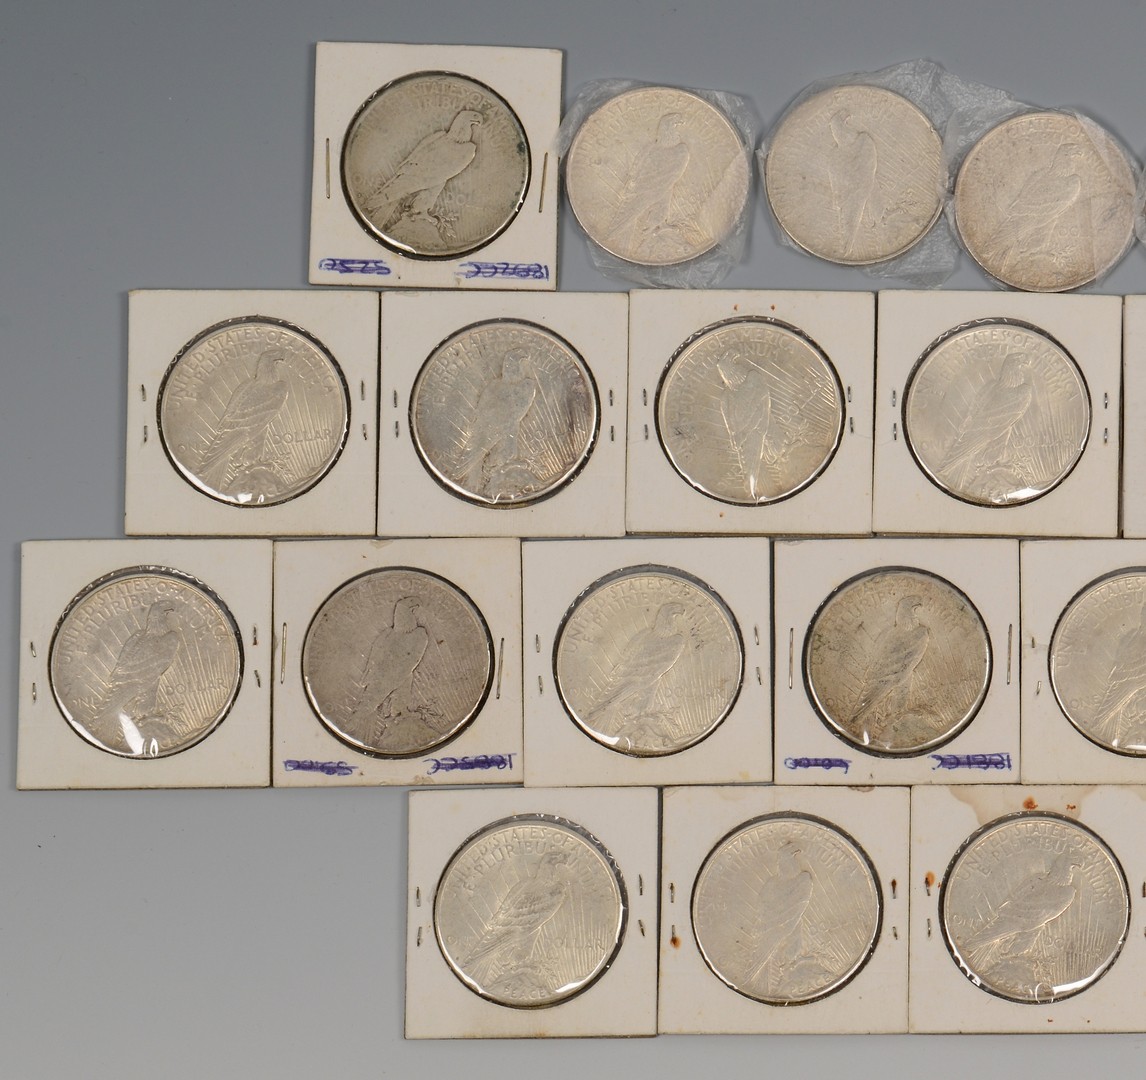 Lot 866: Group of 31 Silver Peace Dollars, 1922-1924